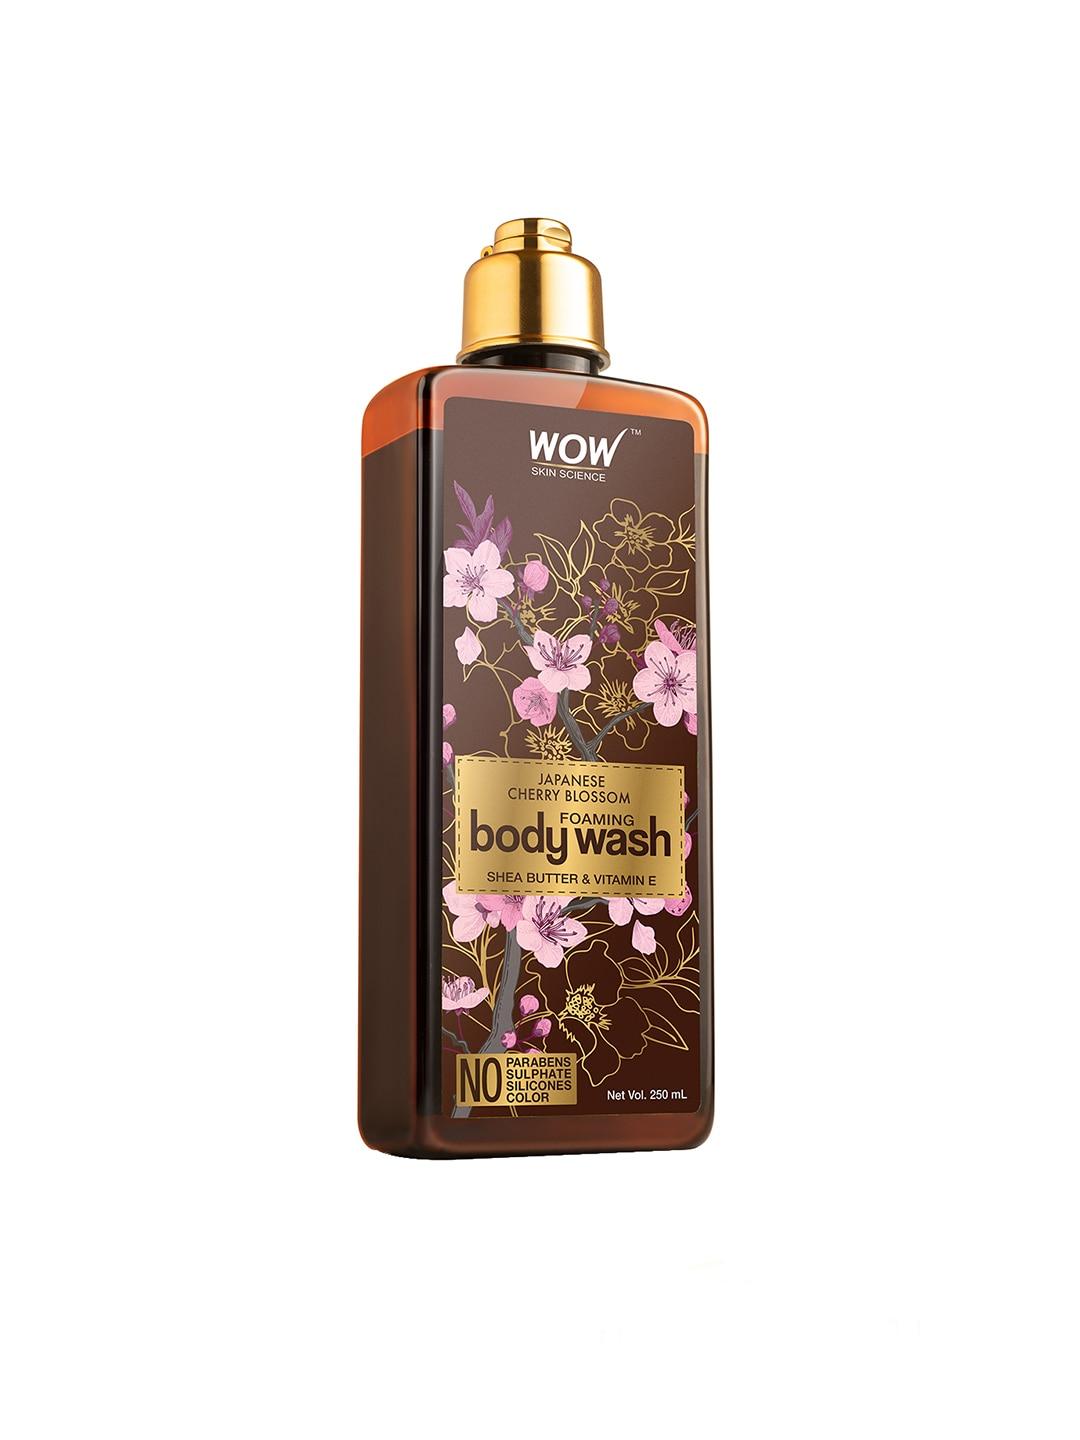 WOW SKIN SCIENCE Unisex Brown Japanese Cherry Blossom Foaming Body Wash - 250mL